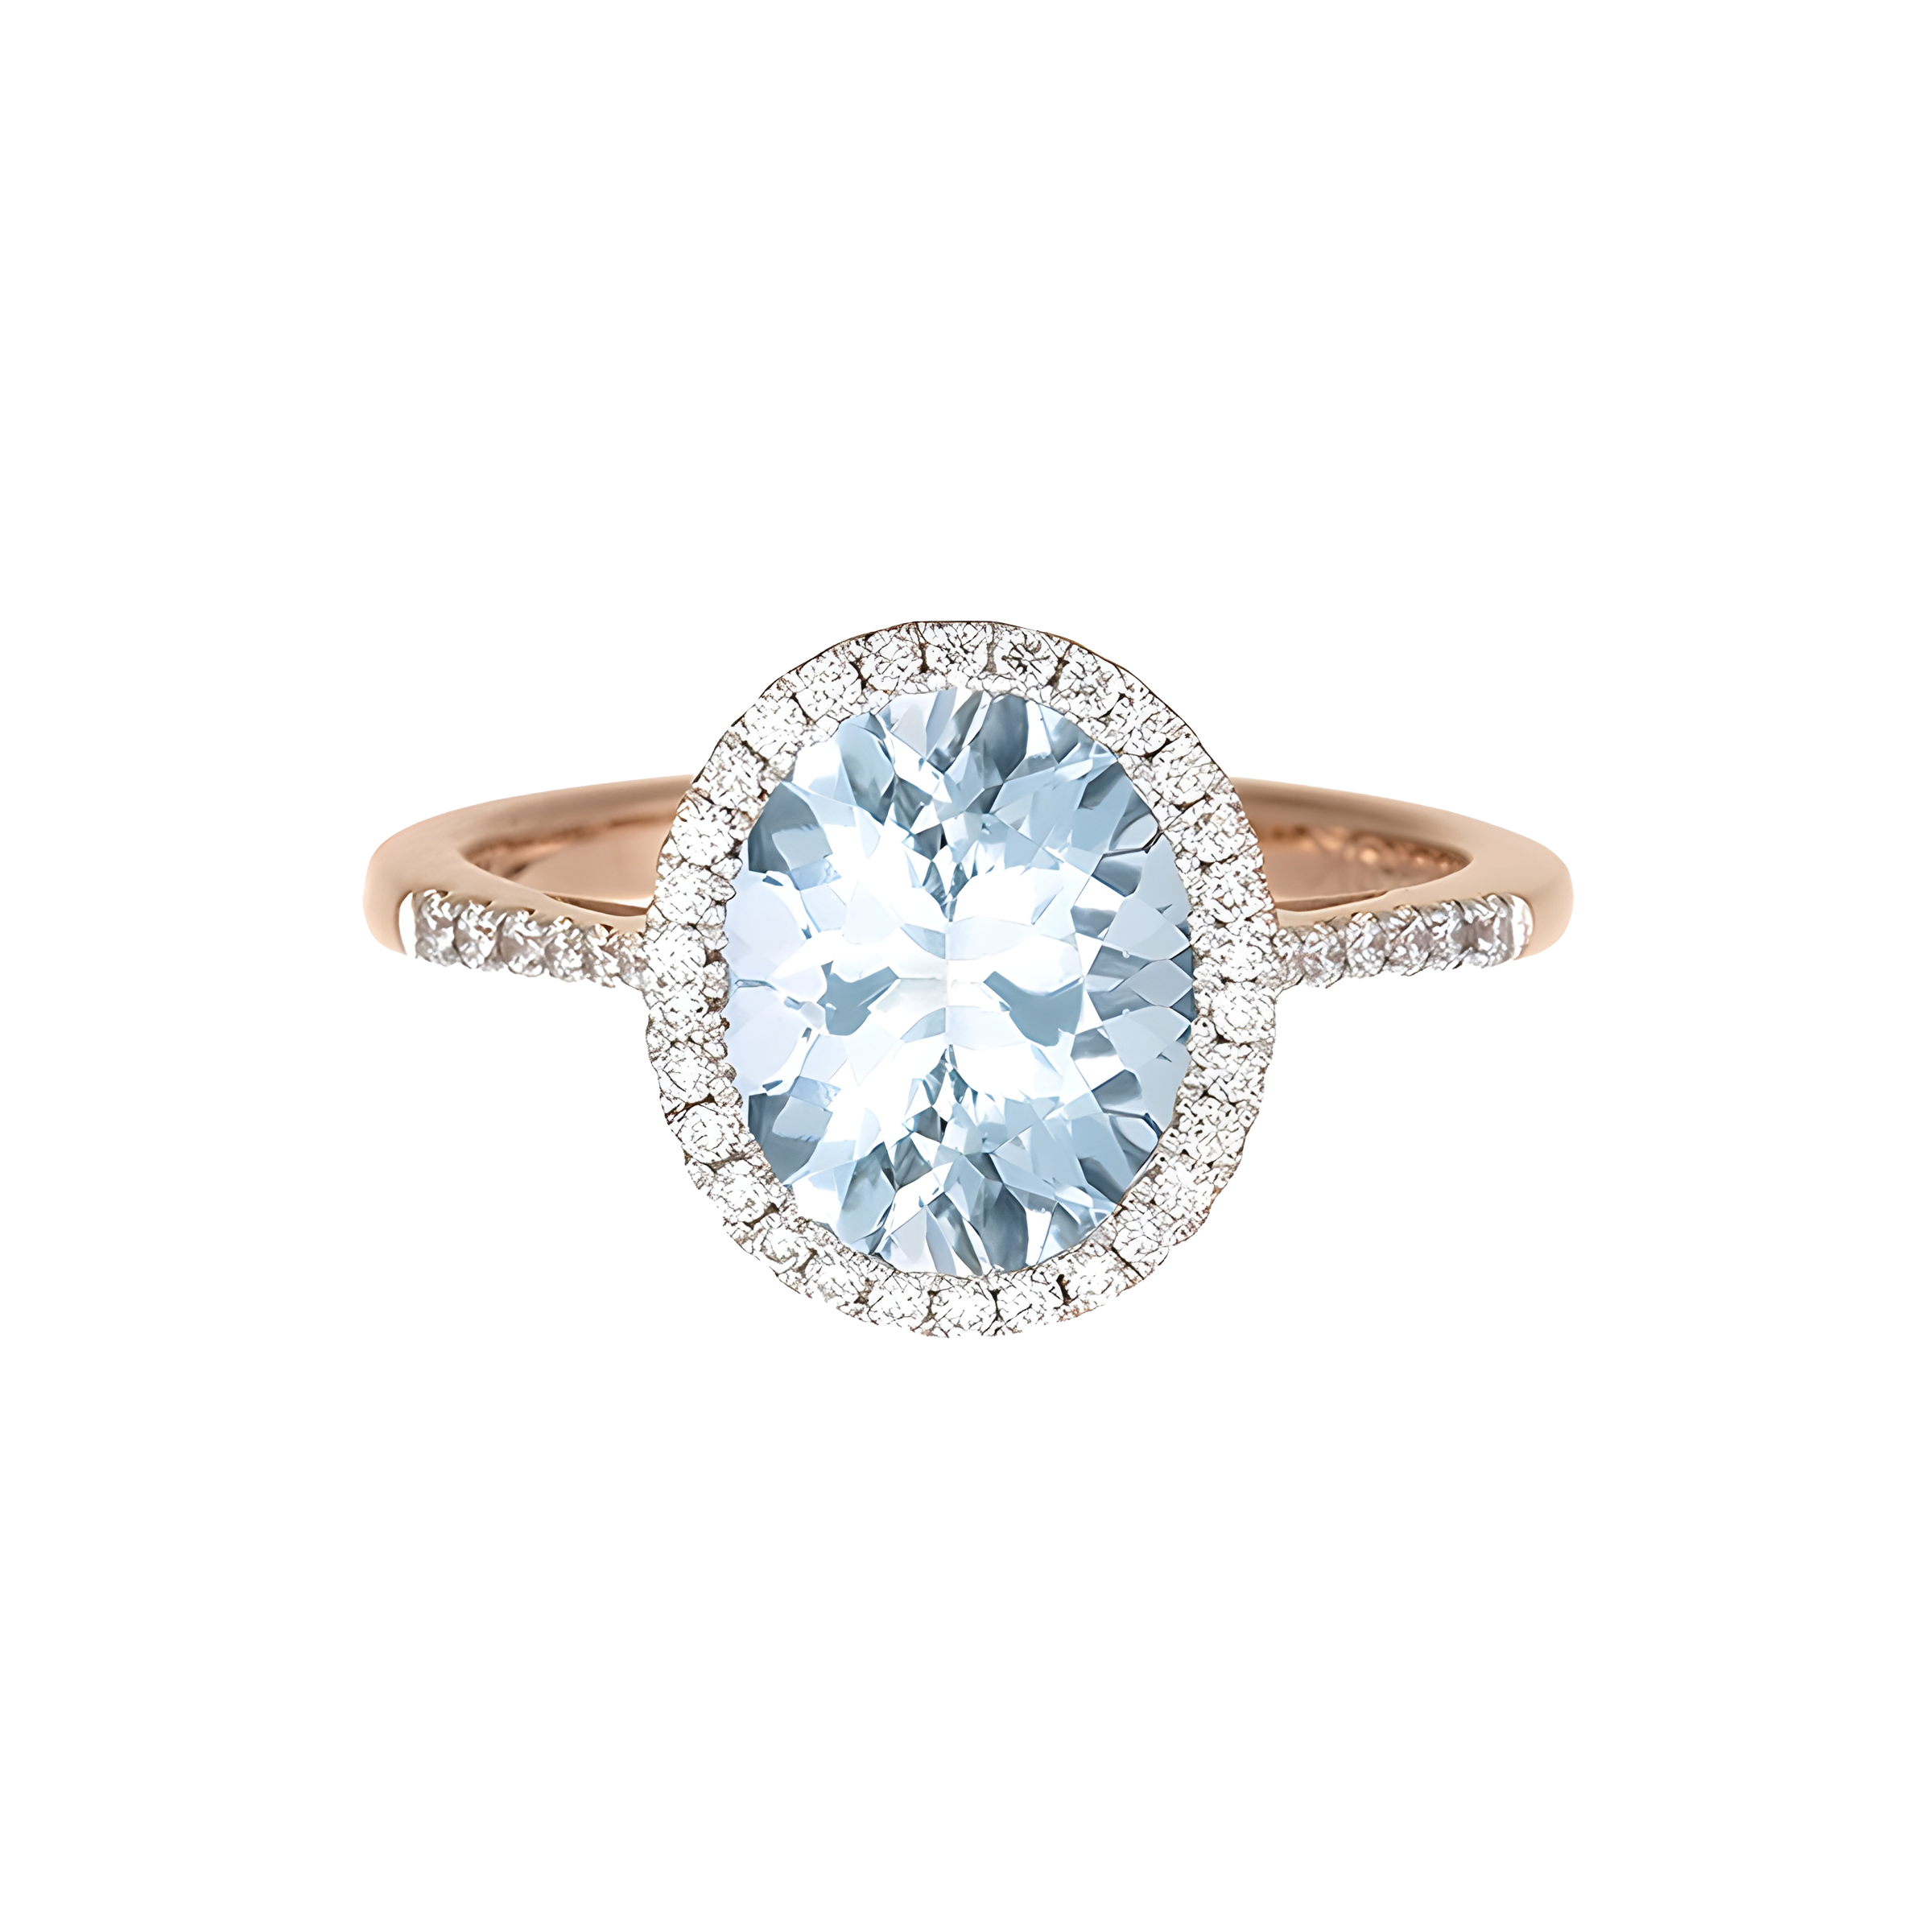 Oval Aquamarine and Diamond Halo Ring in 18k Rose Gold